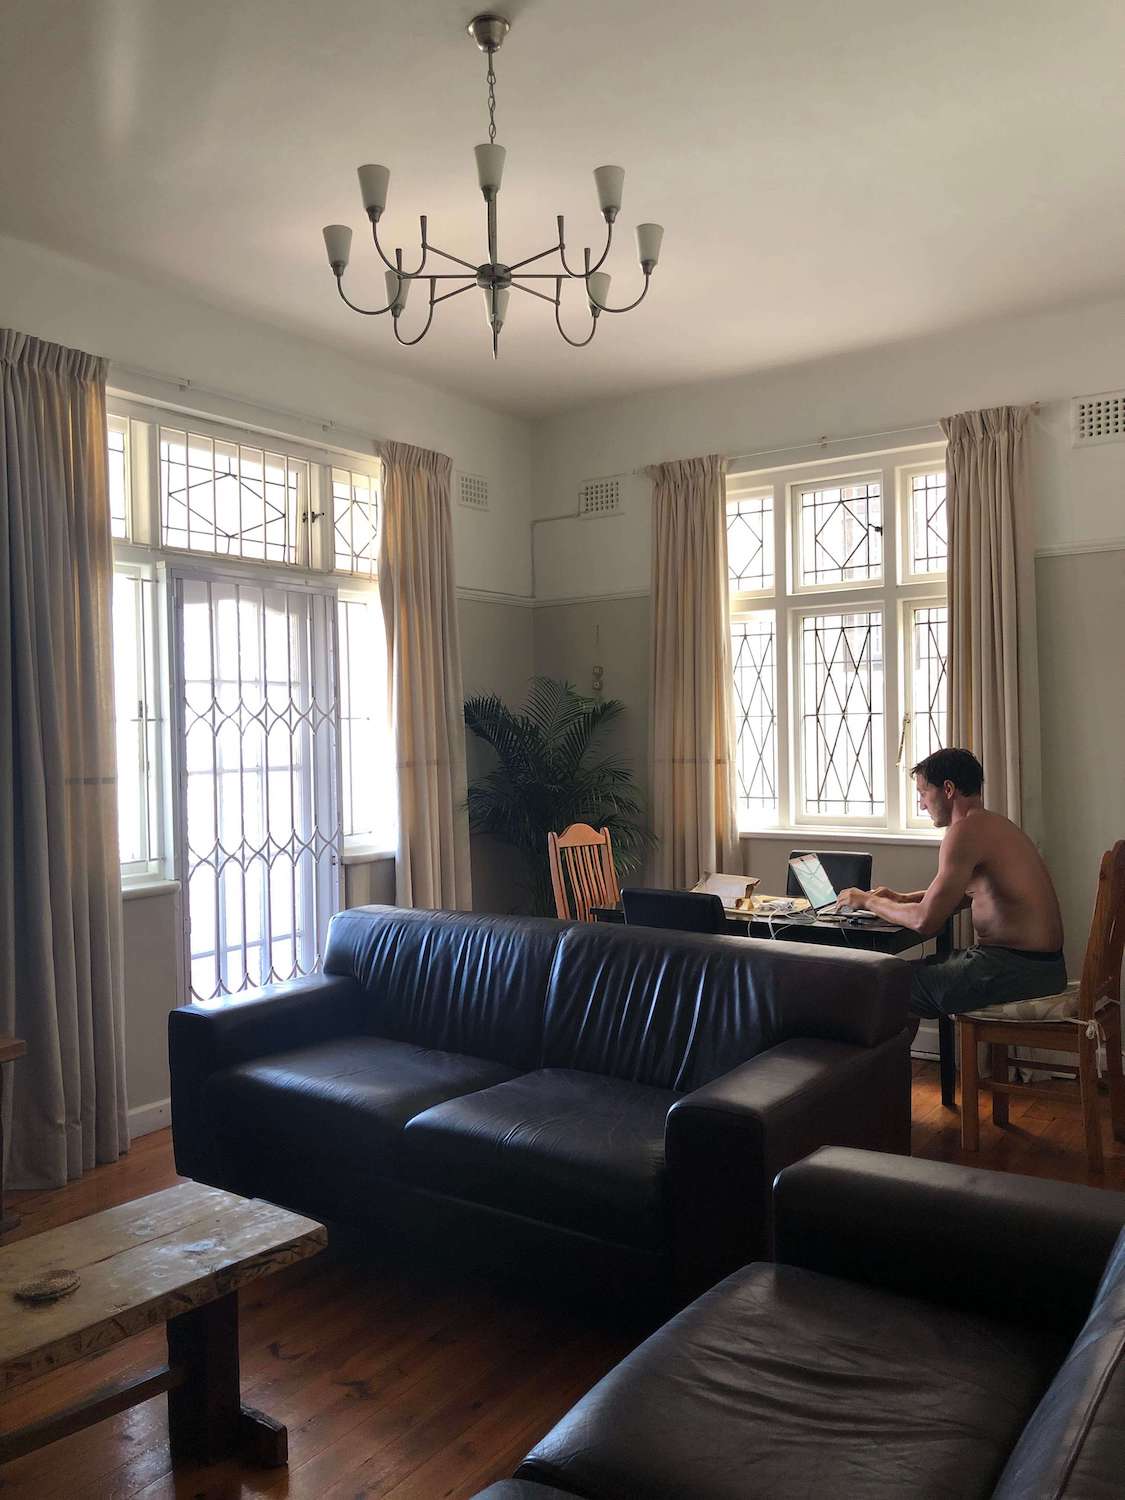 Chris in Airbnb looking for apartments in Cape Town